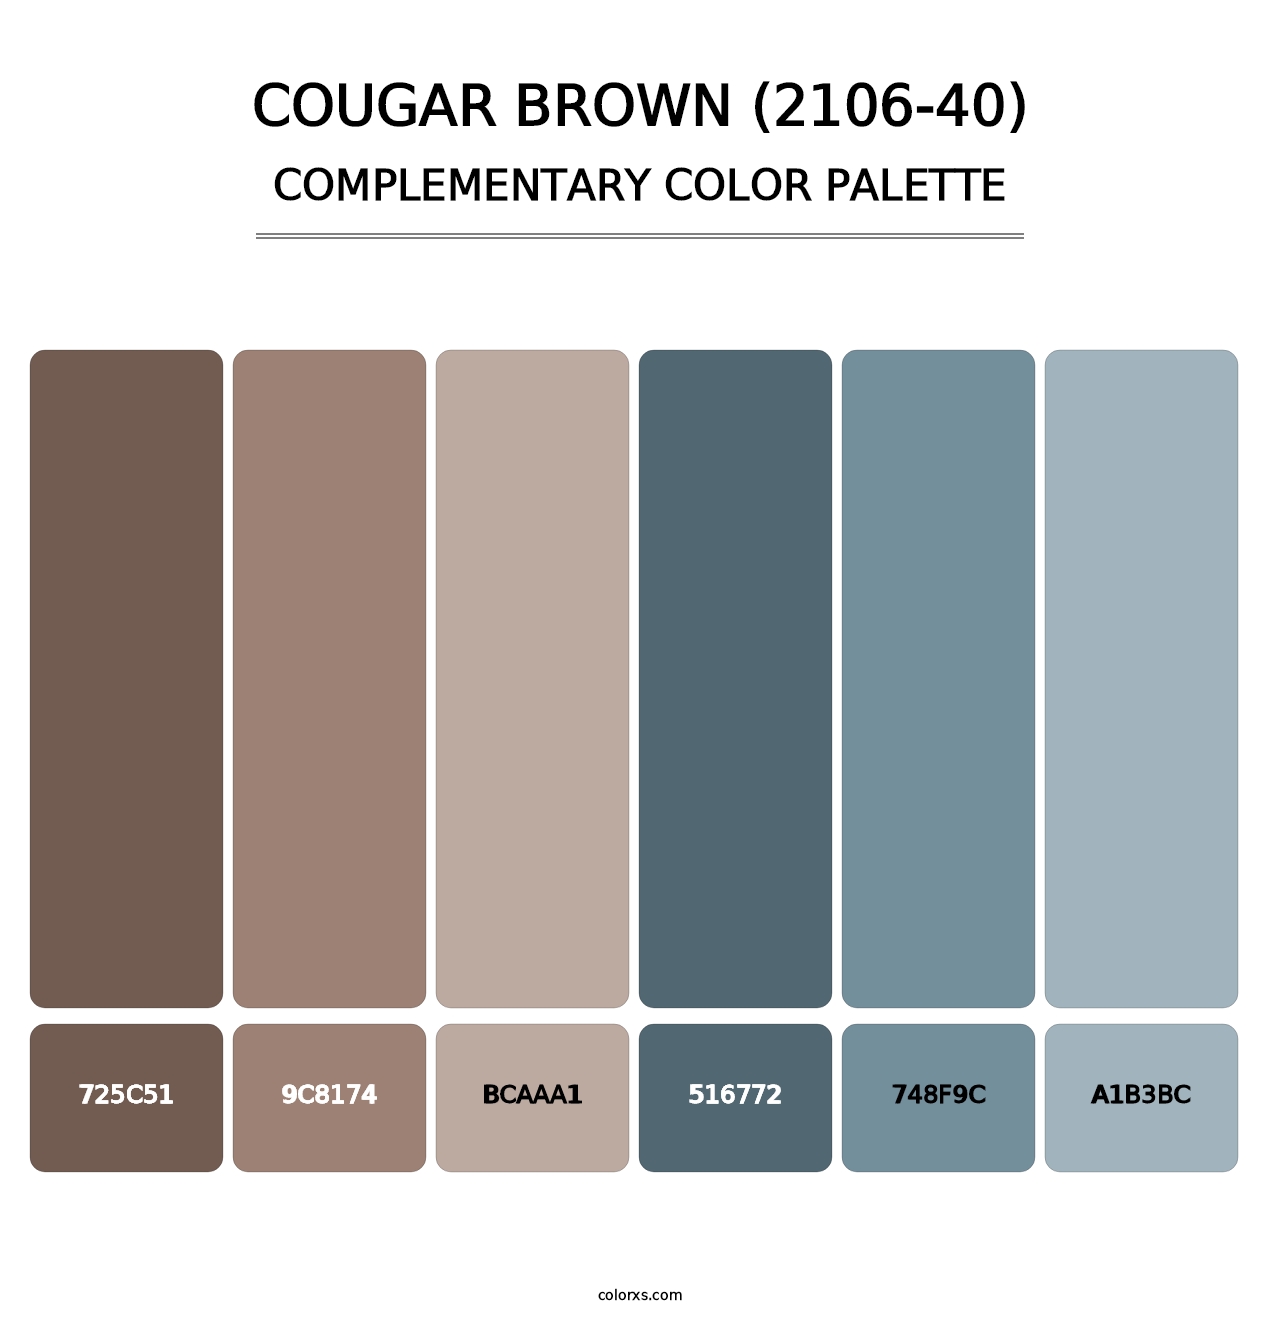 Cougar Brown (2106-40) - Complementary Color Palette